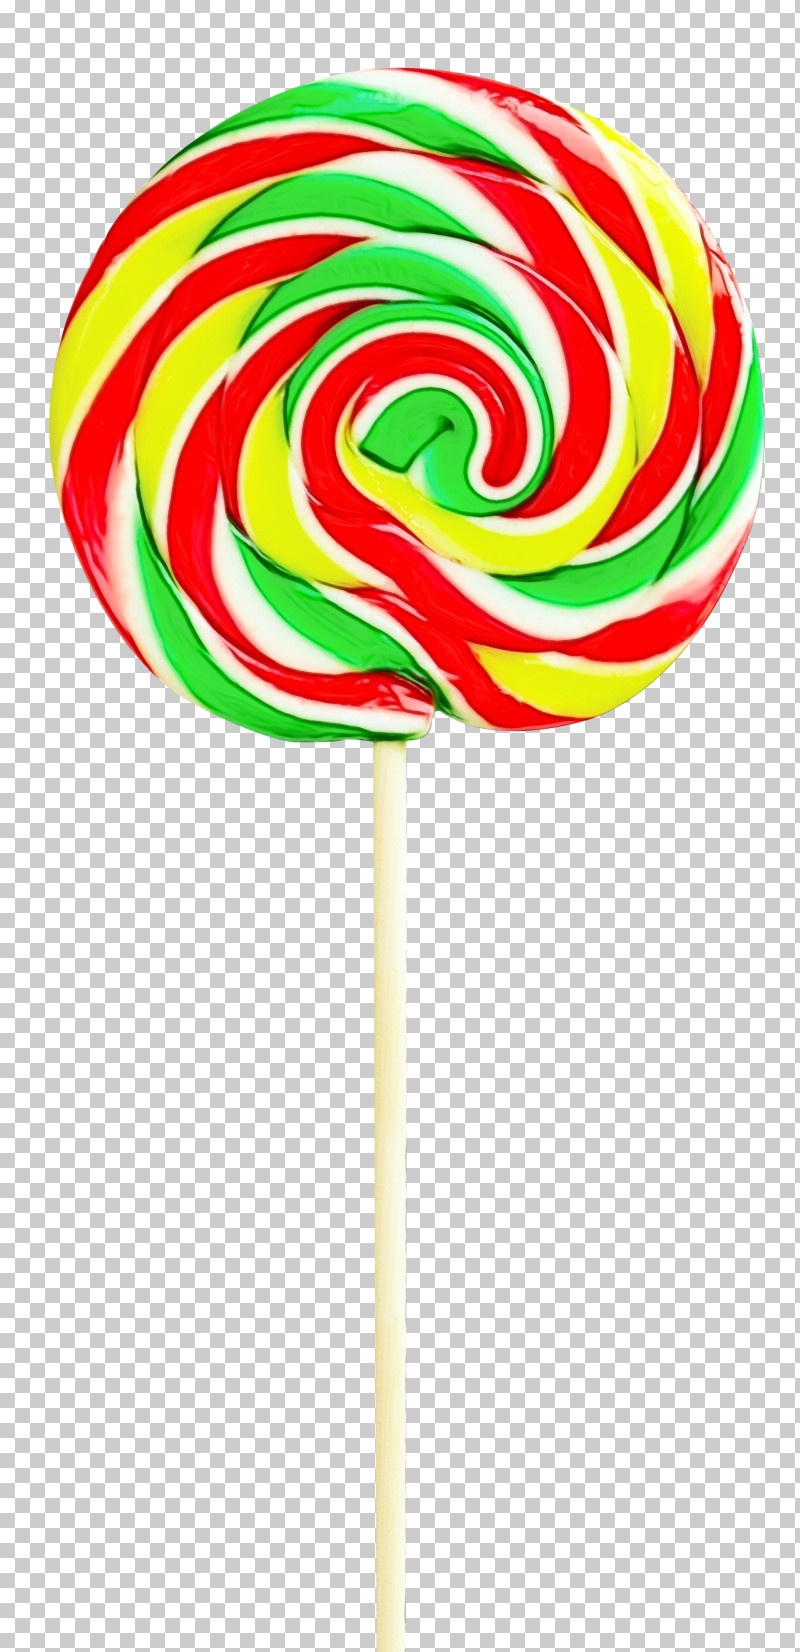 Lollipop Confectionery Candy Rock Candy Chupa Chups PNG, Clipart, Candy, Chupa Chups, Chupa Chups Lollipop, Chupa Chups Lollipops, Confection Free PNG Download